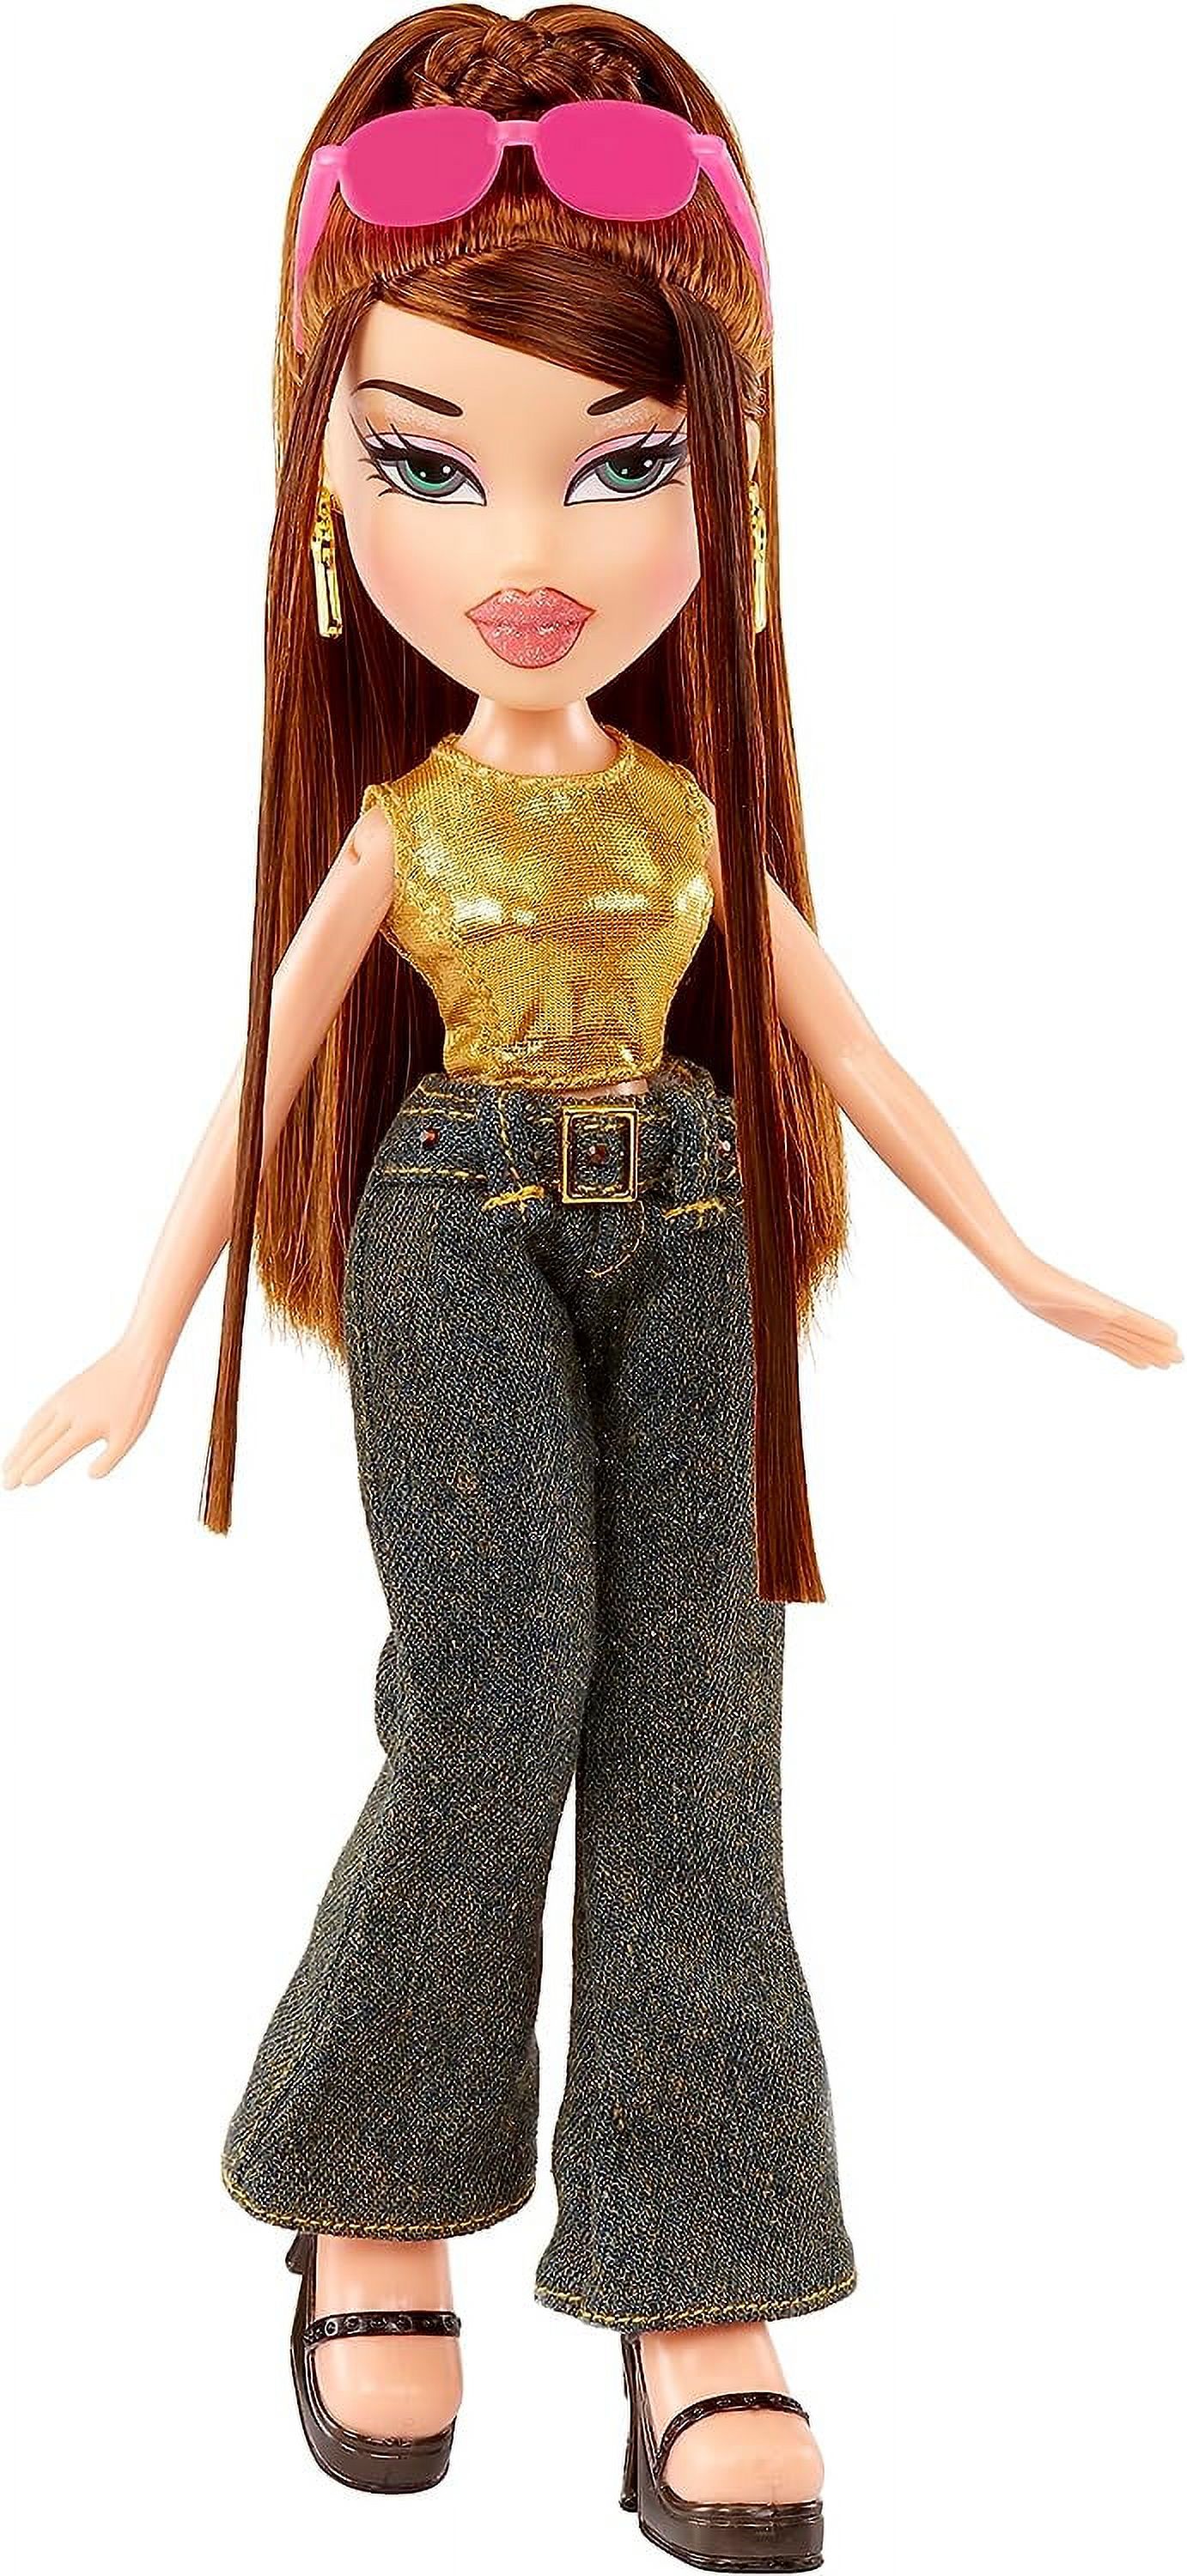 Bratz Original Fashion Doll Dana Series 3 with 2 Outfits and Poster, Collectors Ages 6 7 8 9 10+ - image 4 of 7